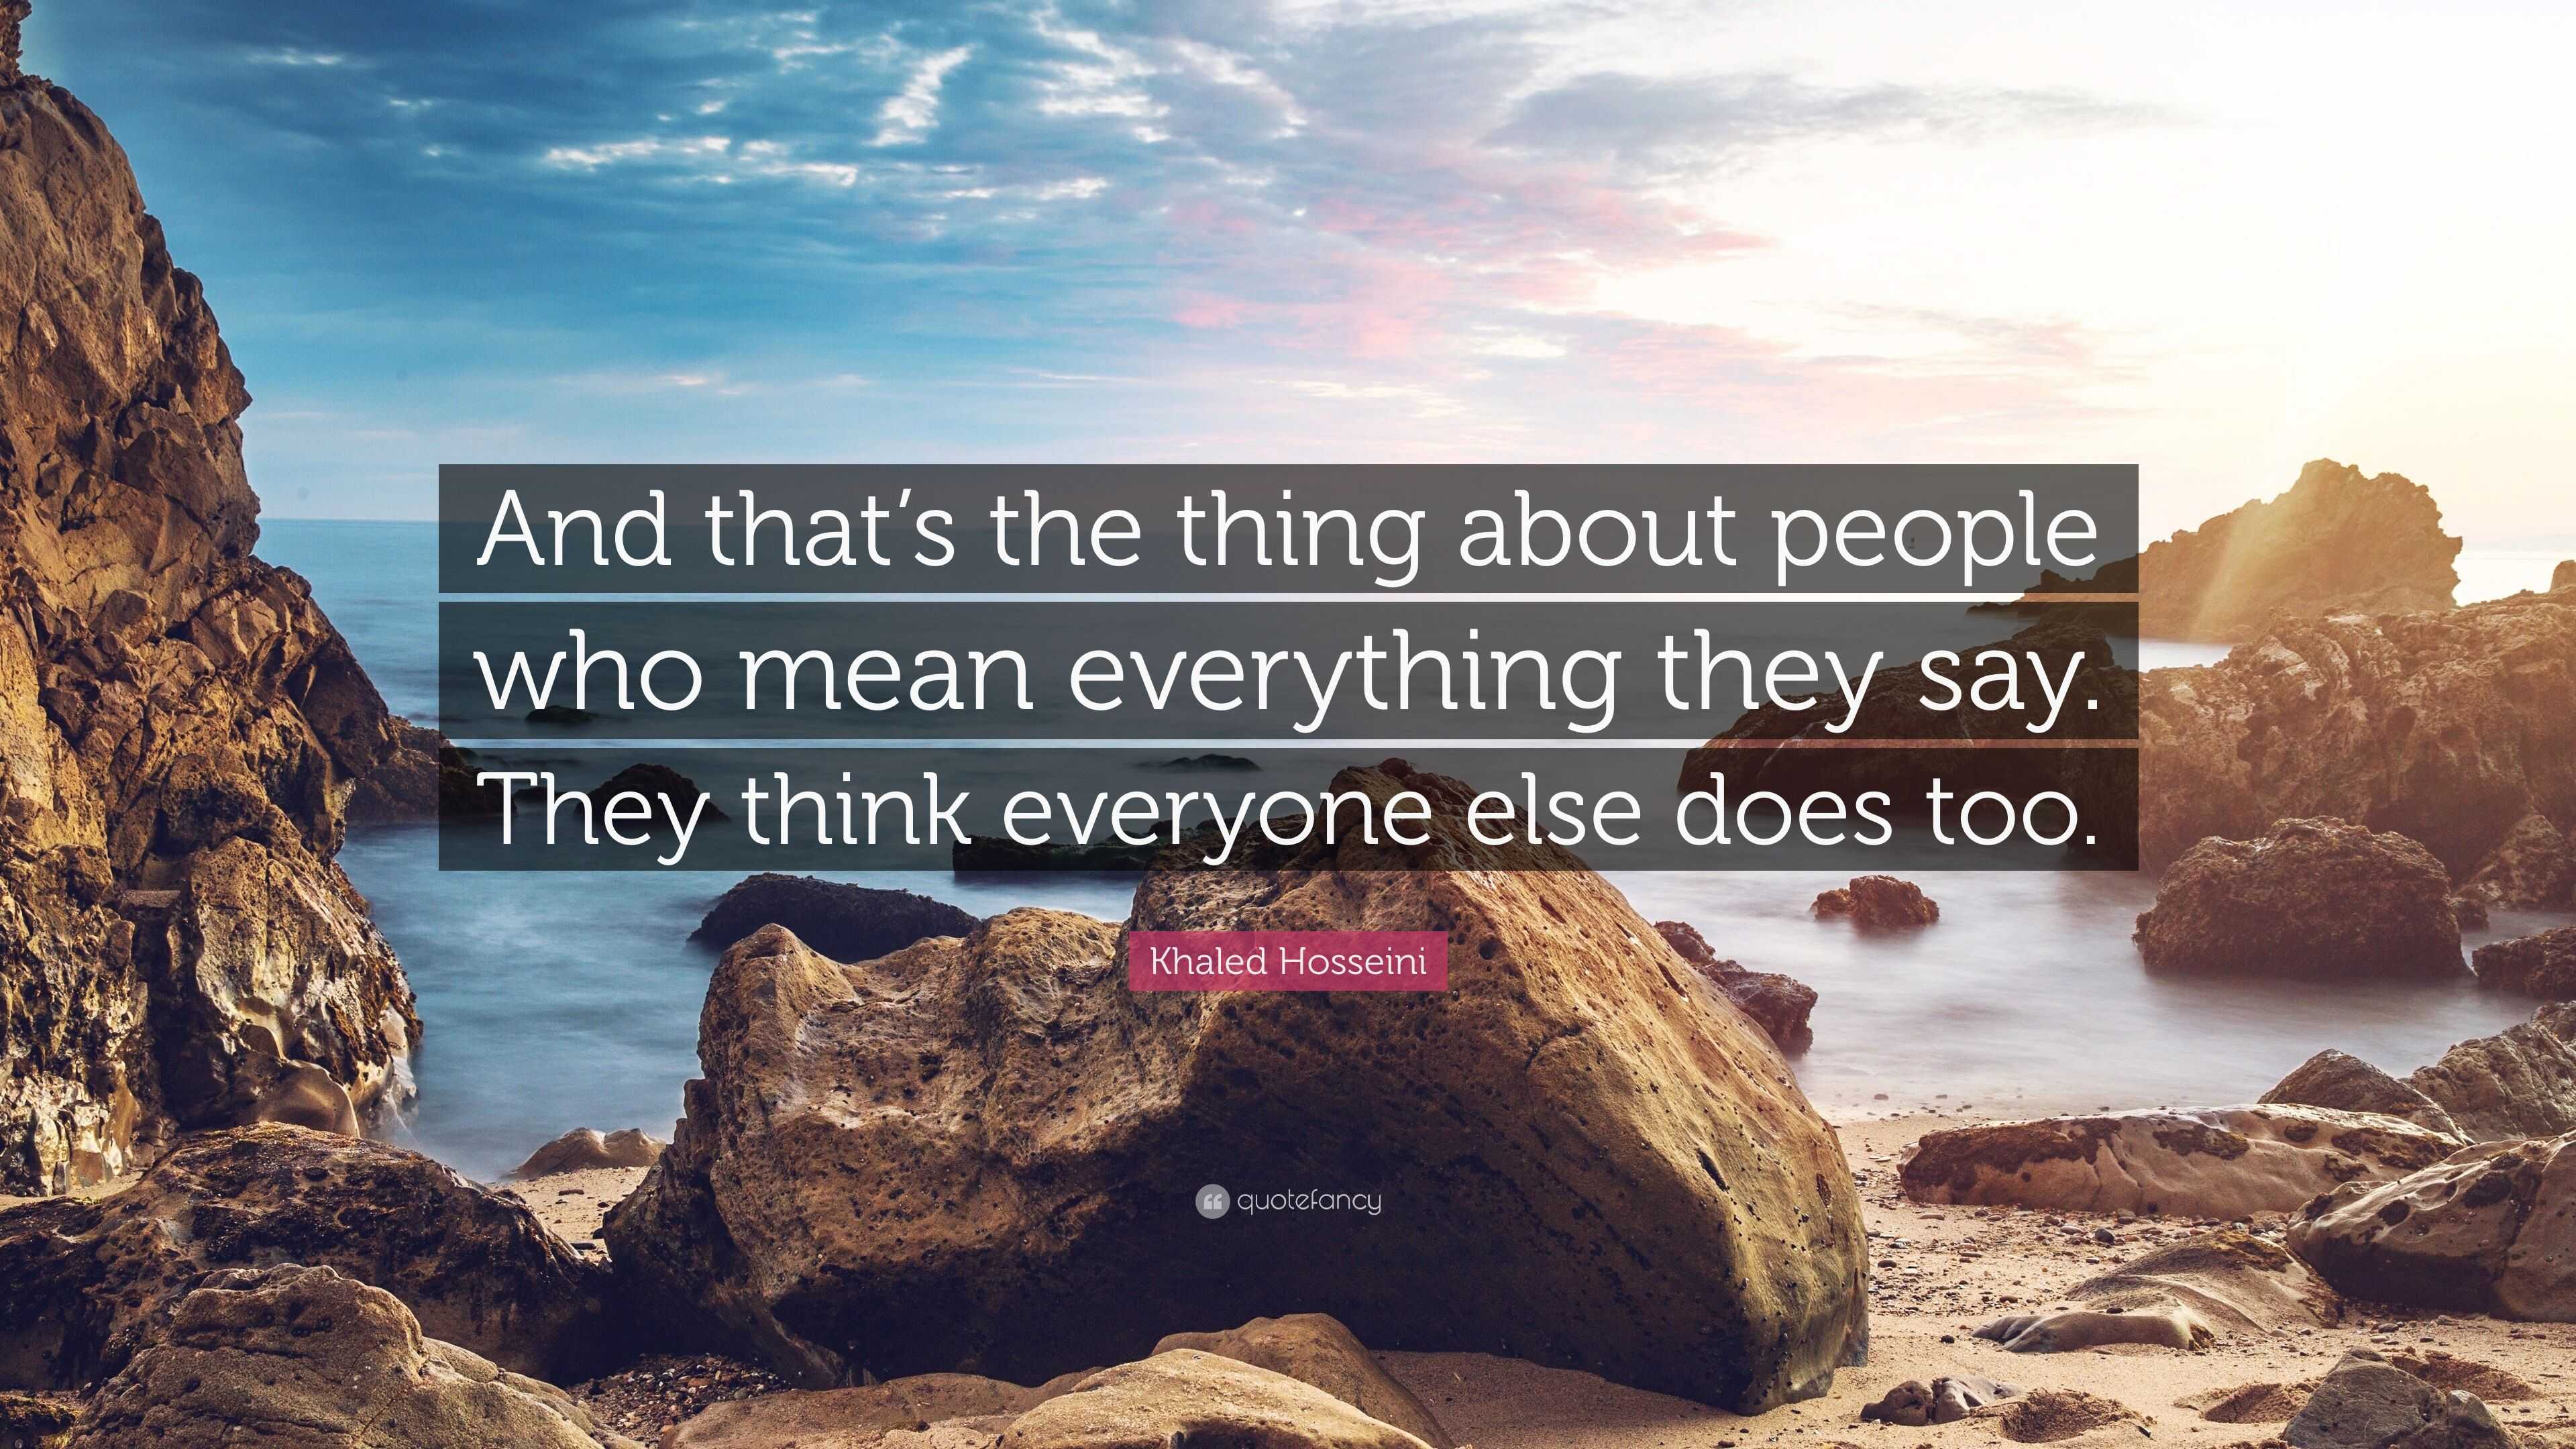 Khaled Hosseini Quote: “And that’s the thing about people who mean ...